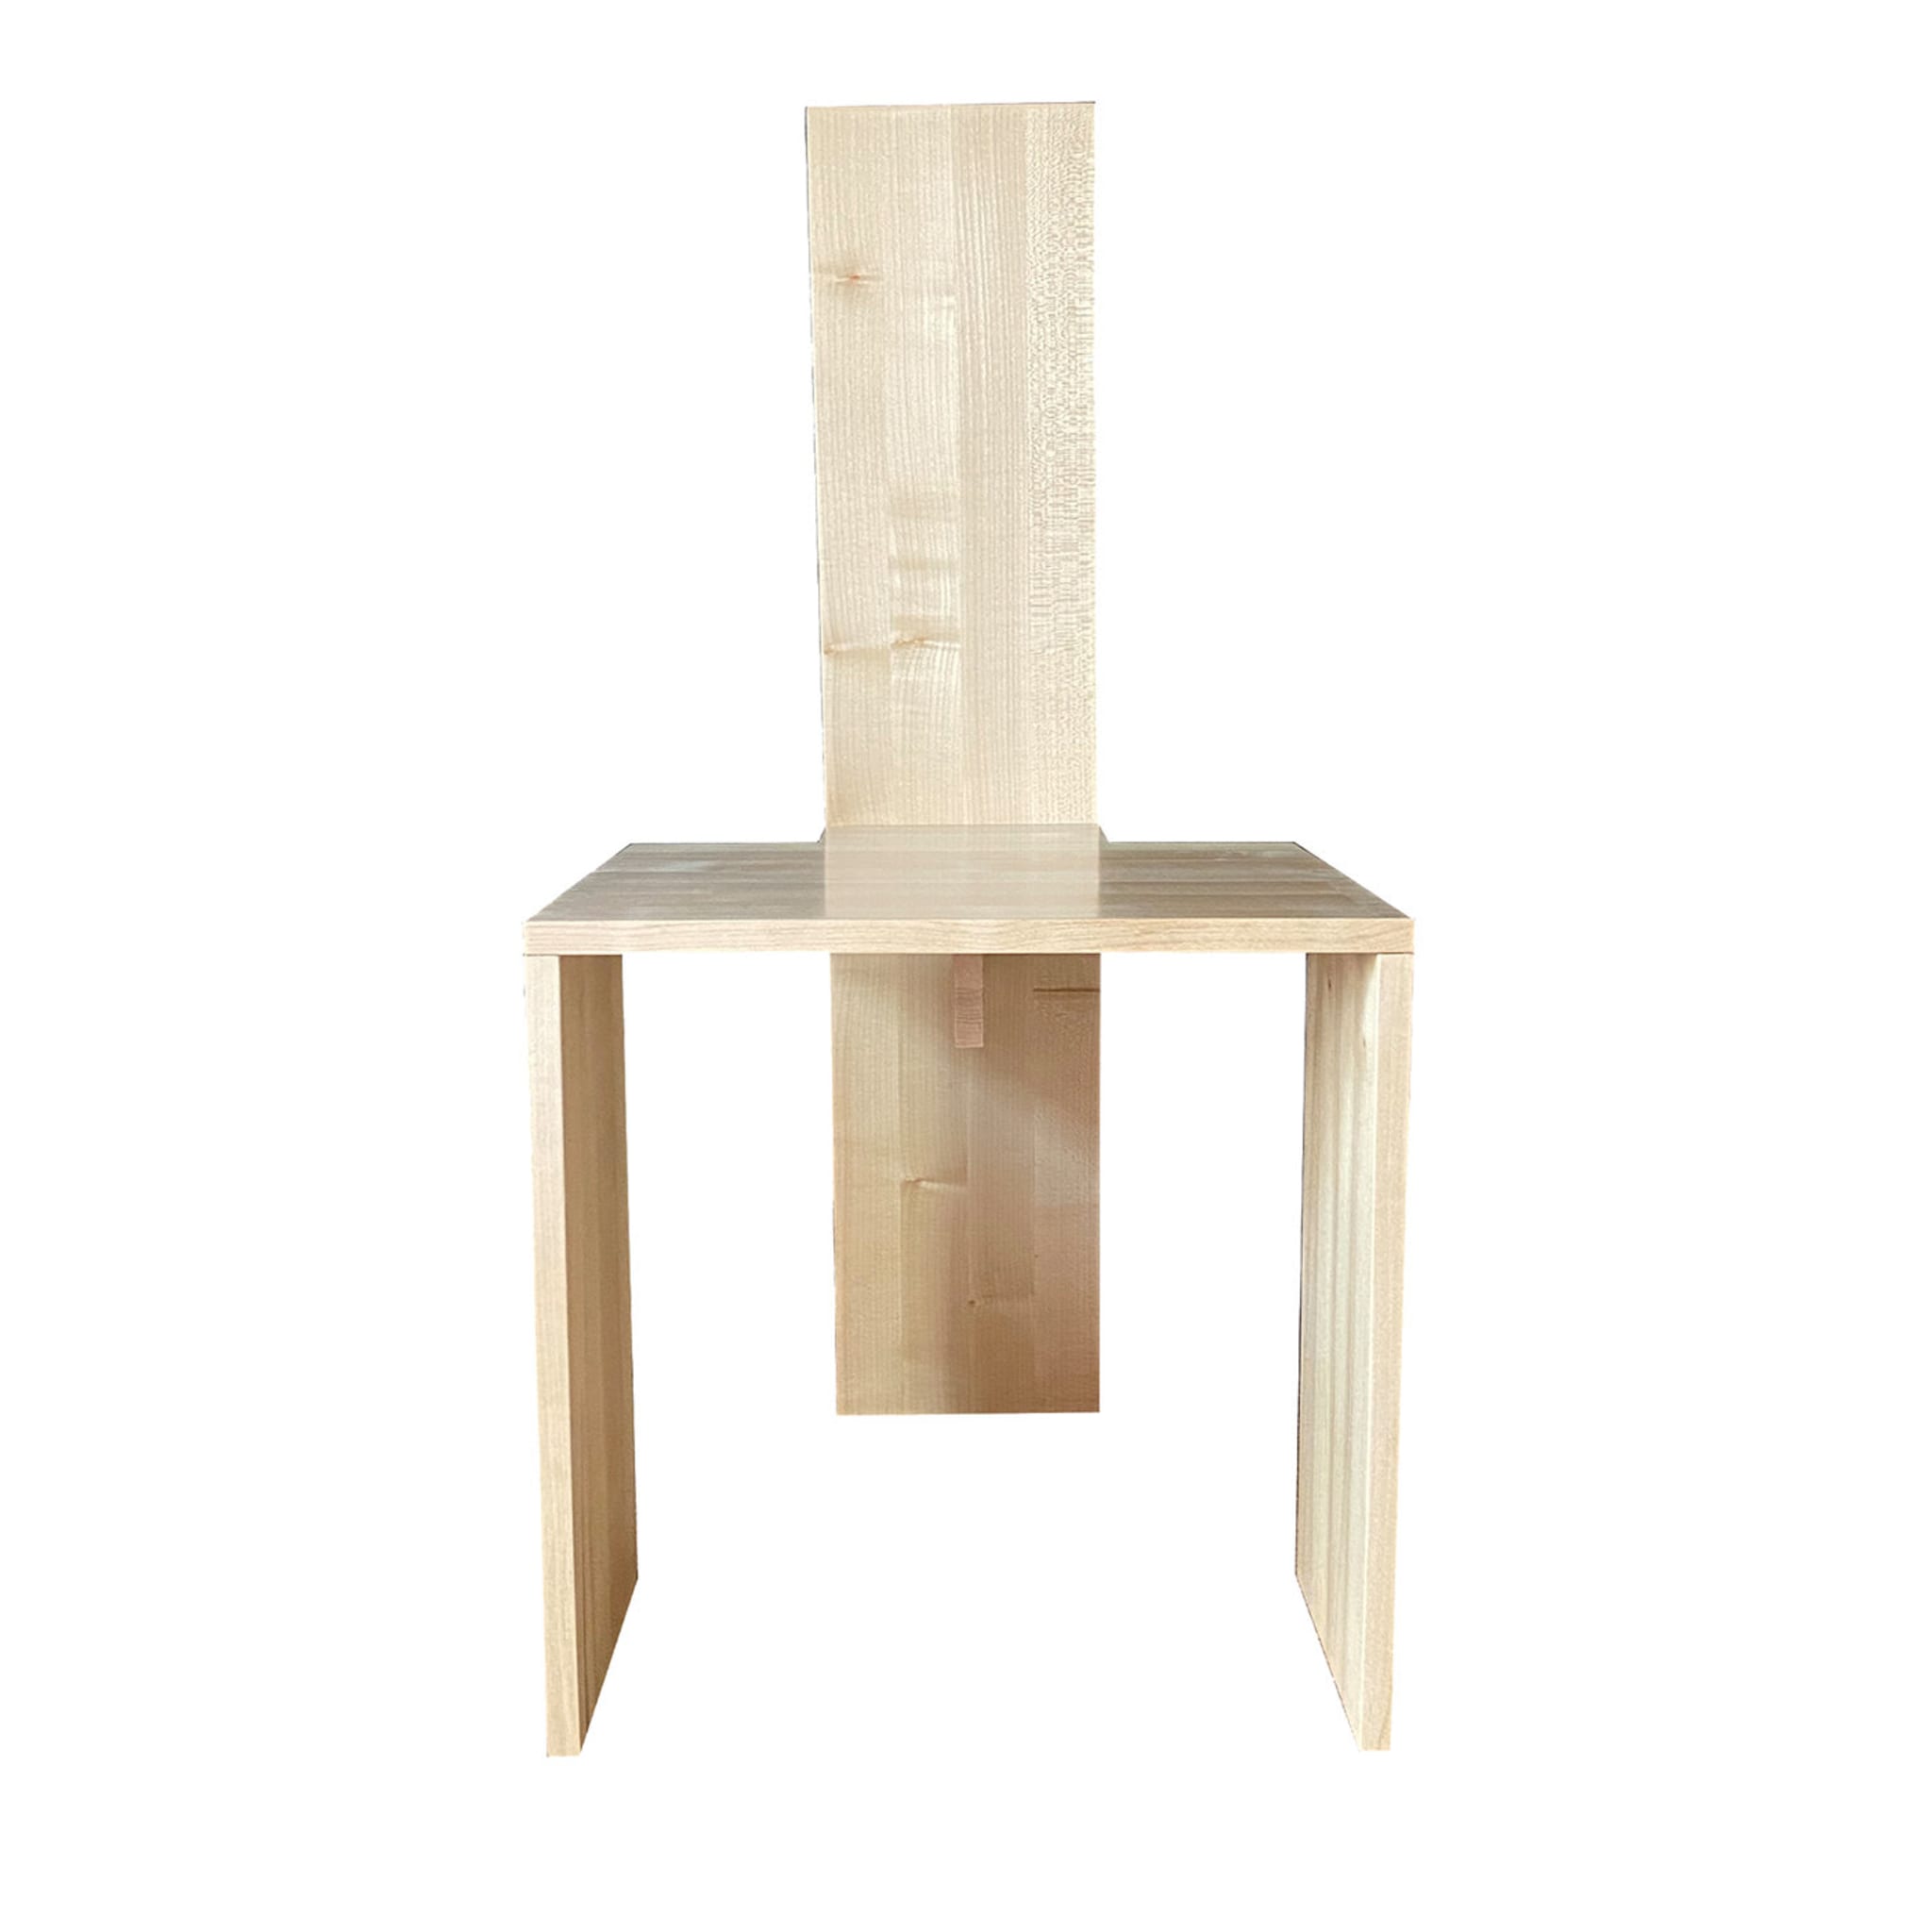 Cimabue White Maple Chair Limited Edition by Ferdinando Meccani - Main view